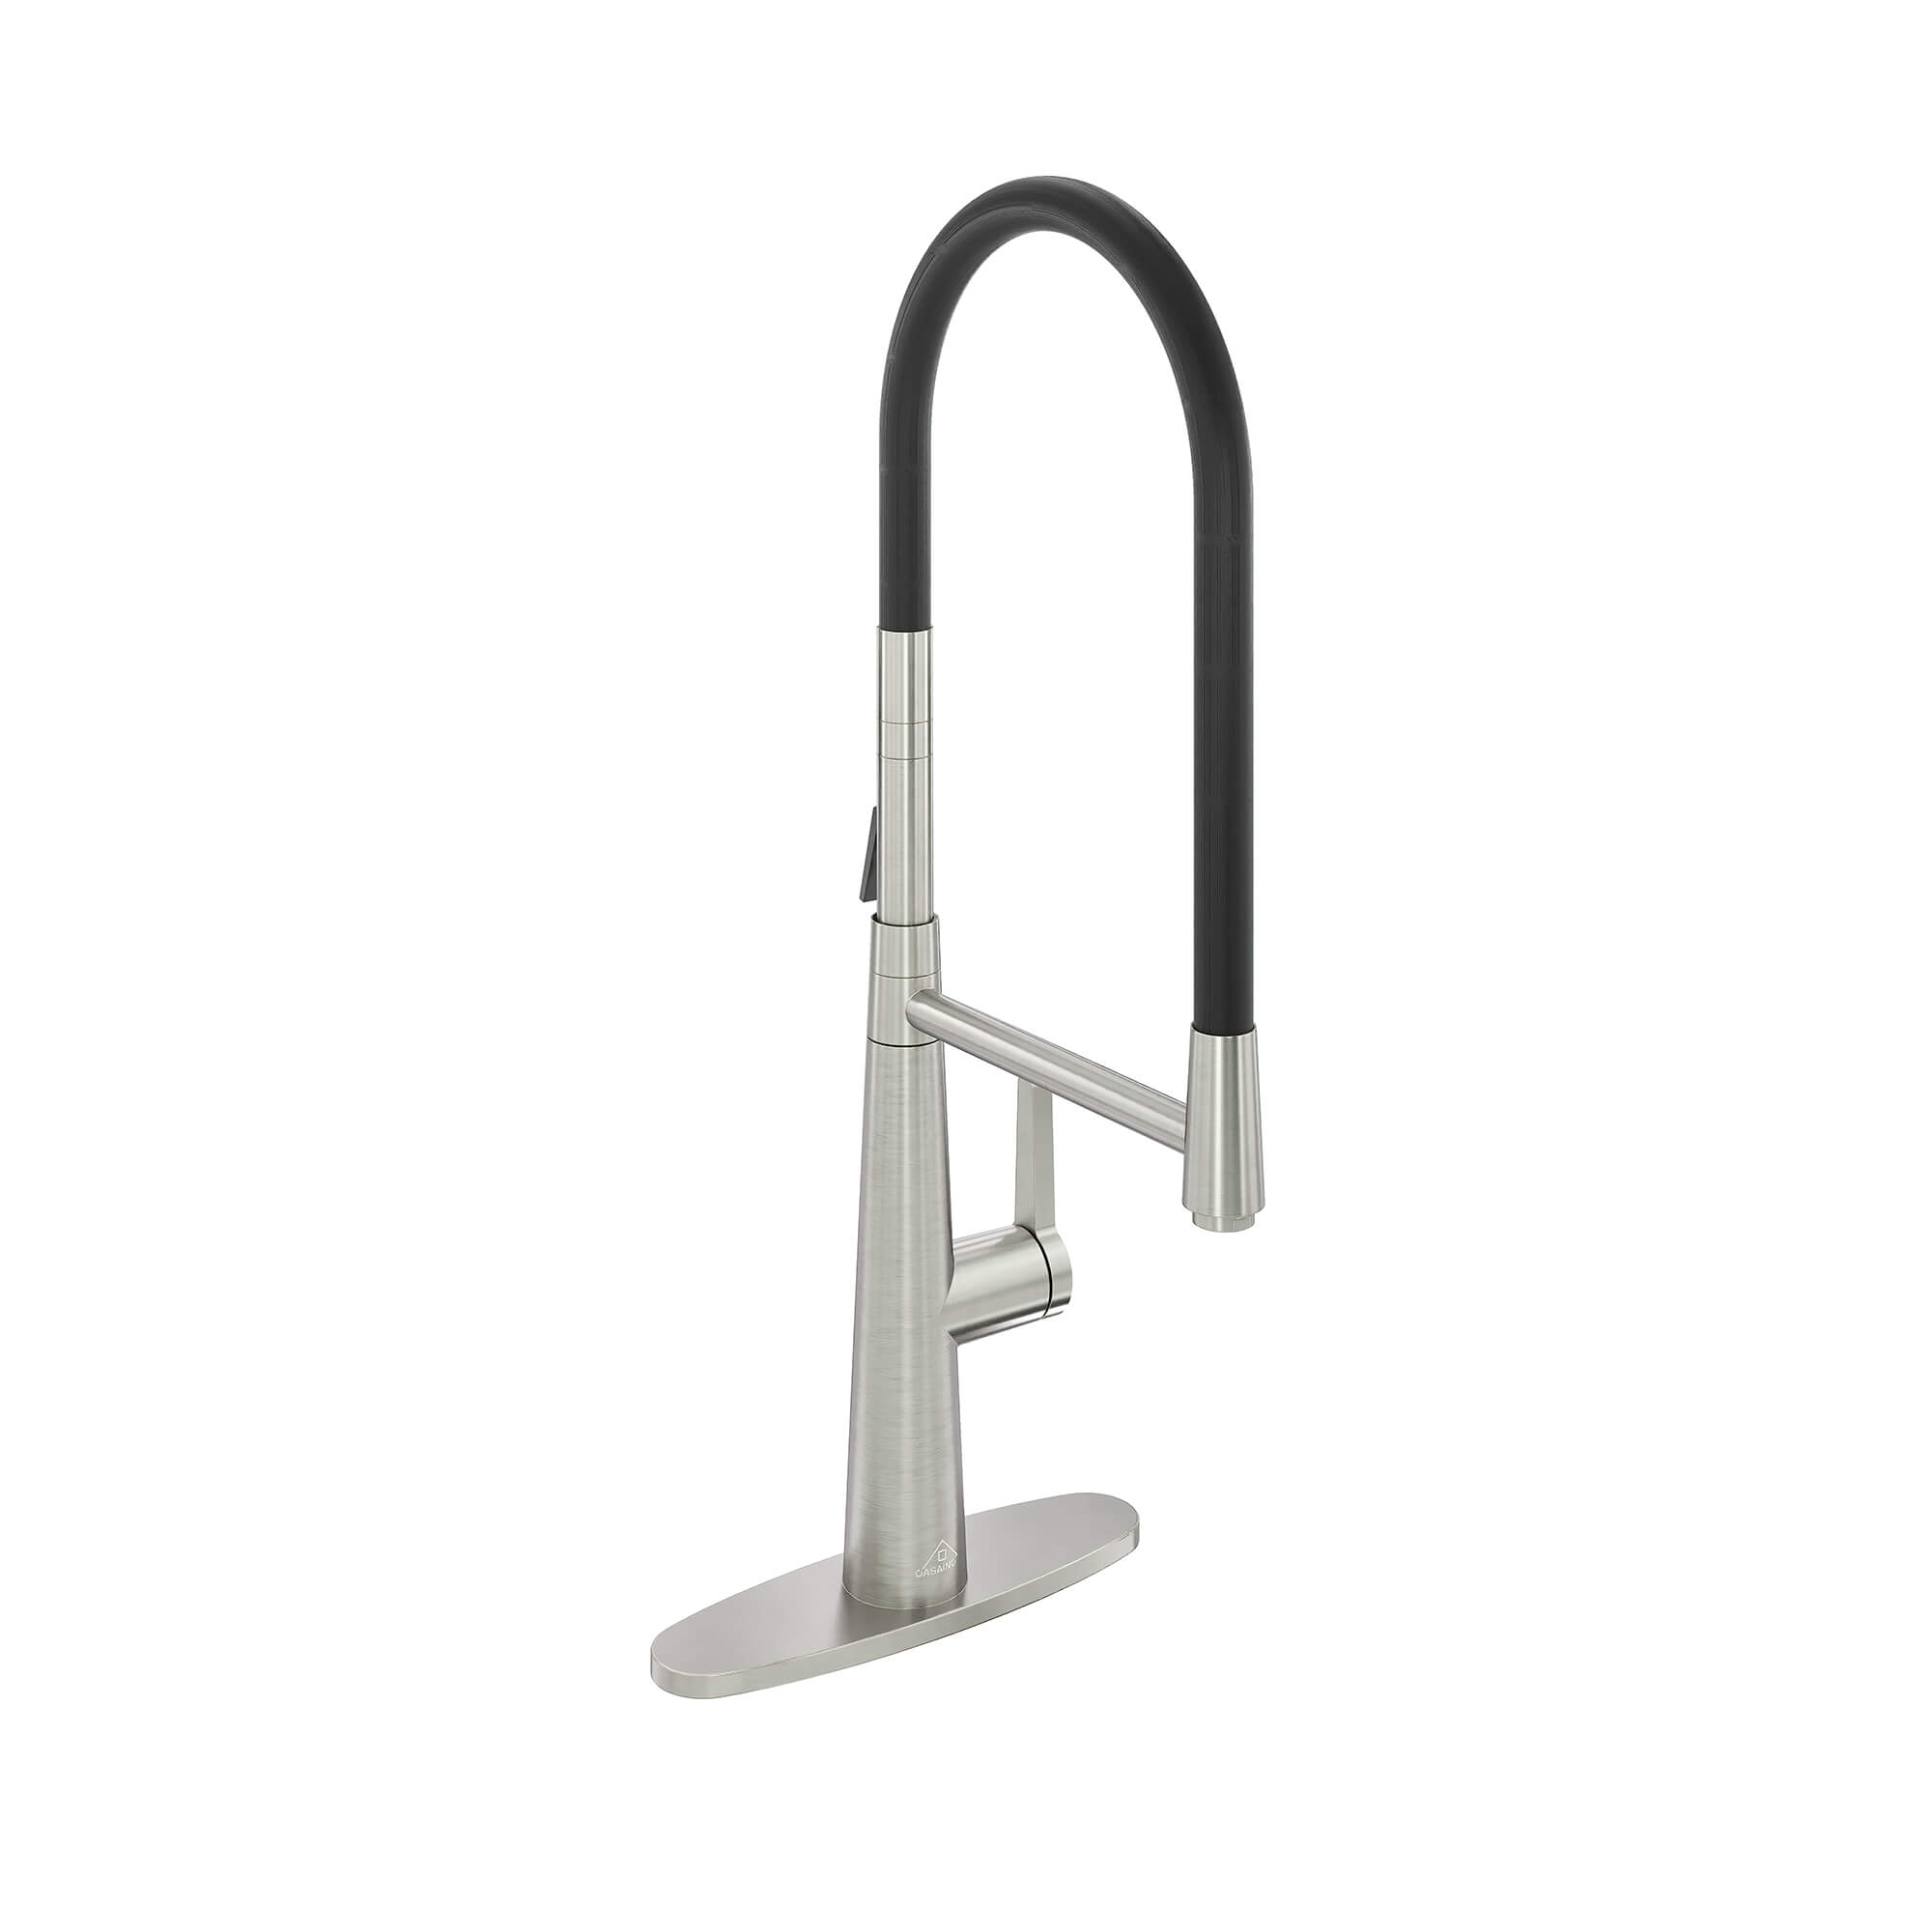 1.8GPM Silicone Kitchen Faucet in Brushed Nickel and More Help to Achieve Stunning Results-CASAINC